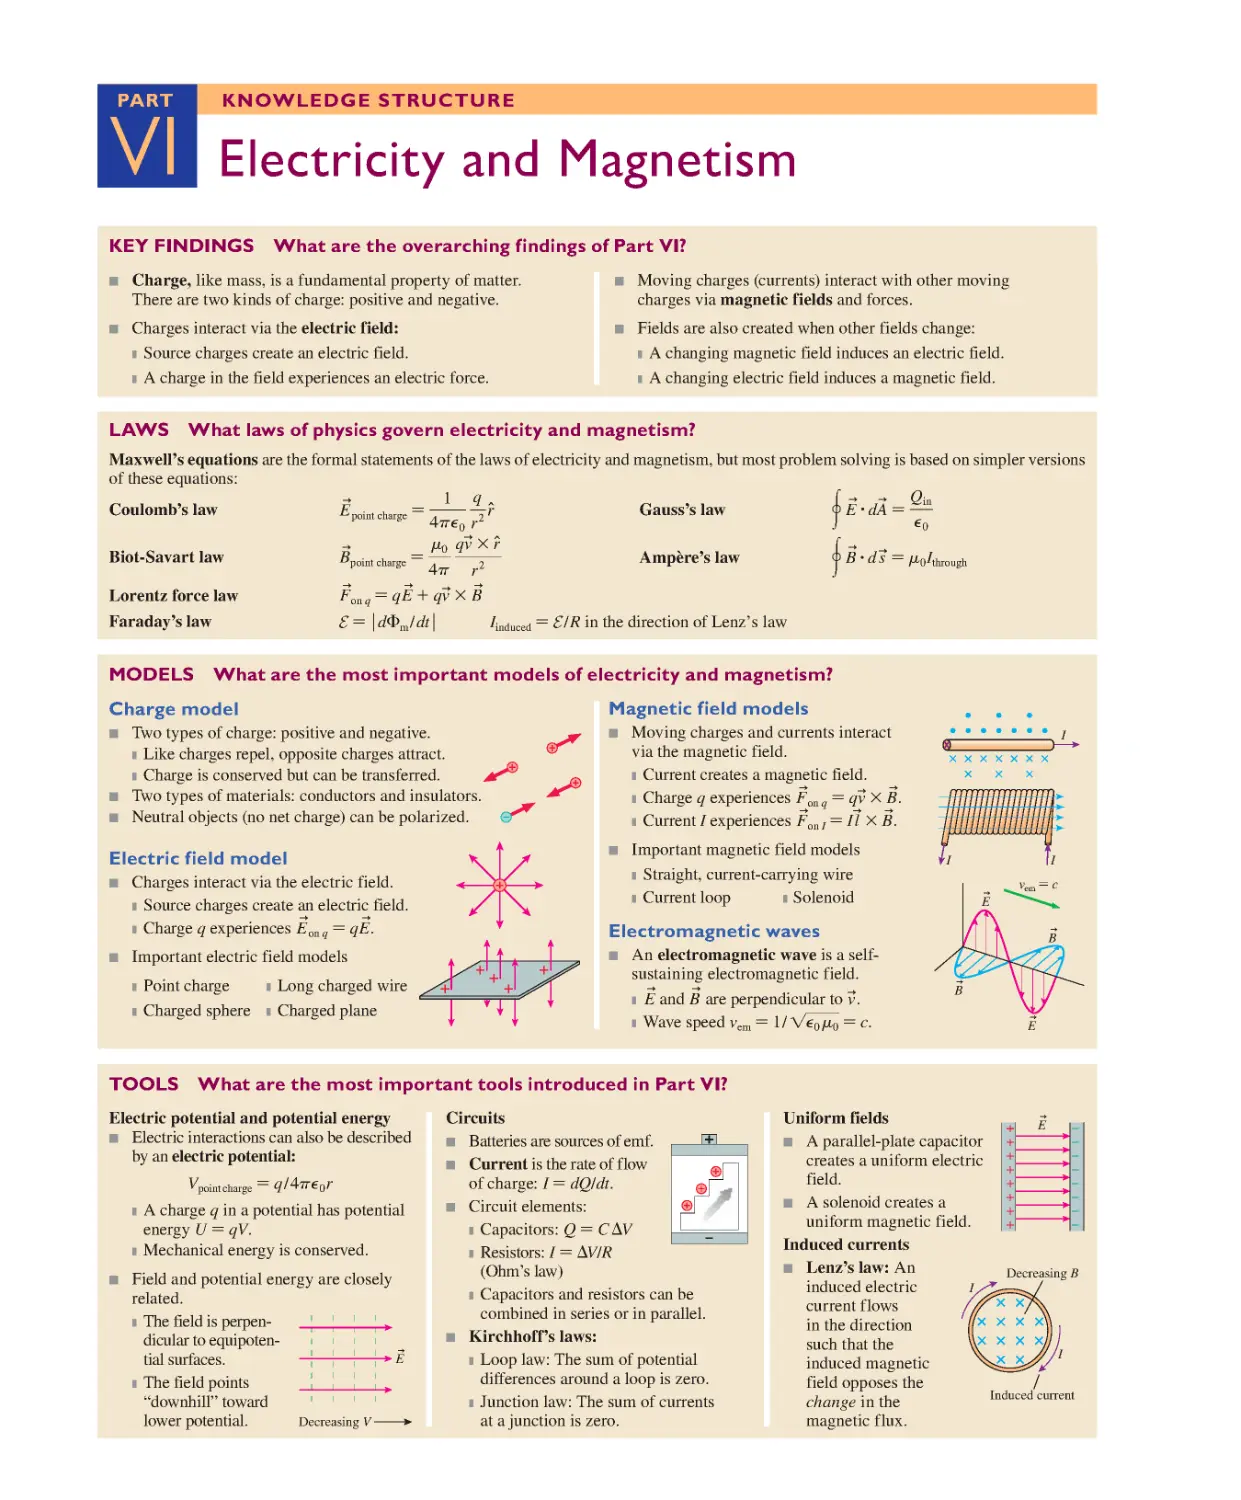 Part VI: Knowledge Structure: Electricity and Magnetism